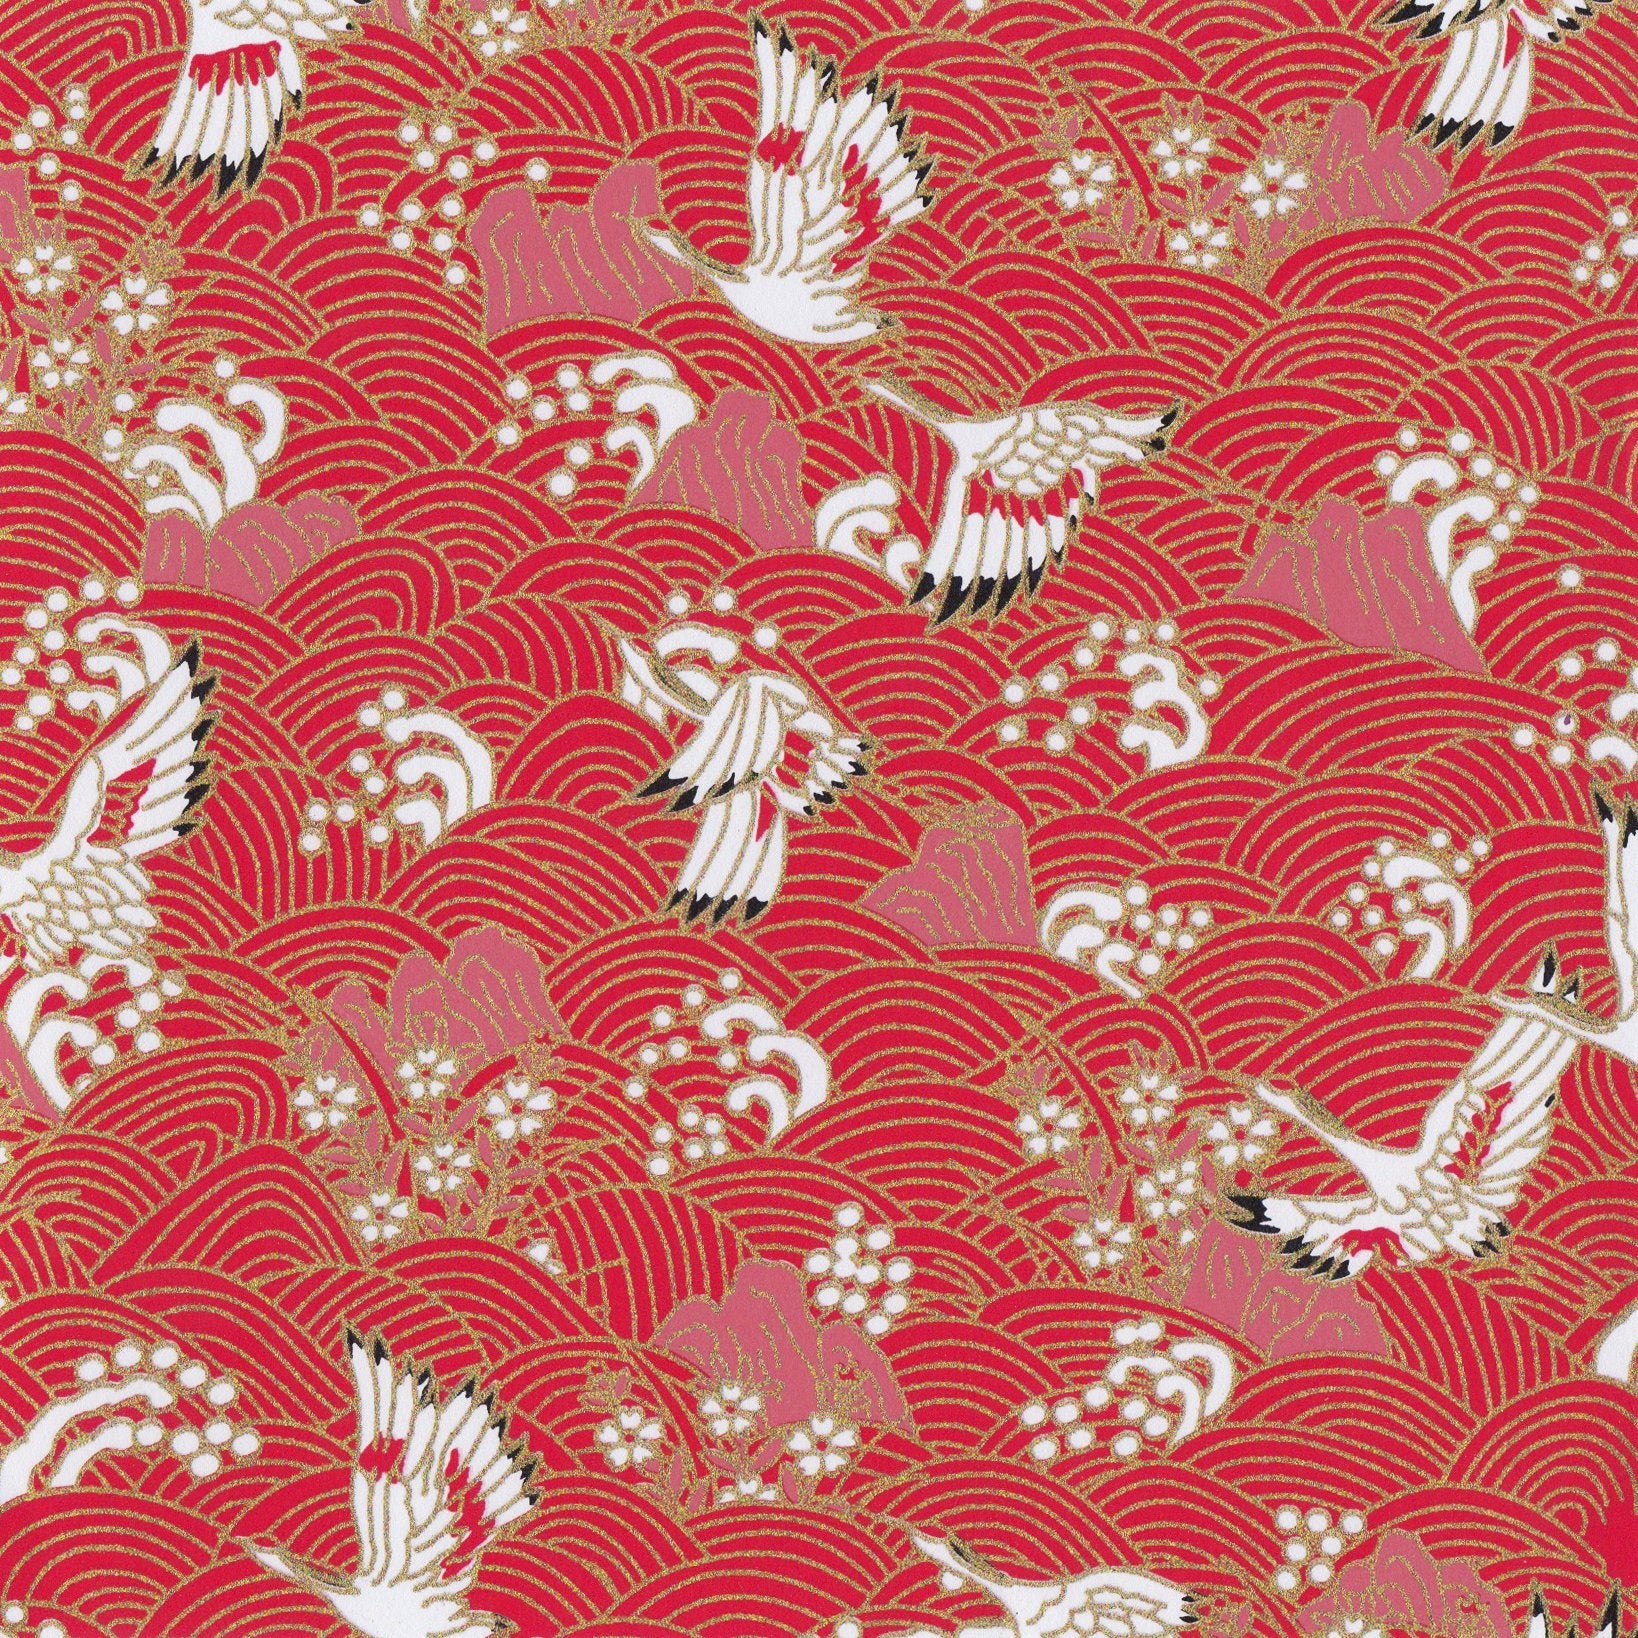 Pack of 20 Sheets 14x14cm Yuzen Washi Origami Paper HZ-315 - Cranes & Waves Red - washi paper - Lavender Home London